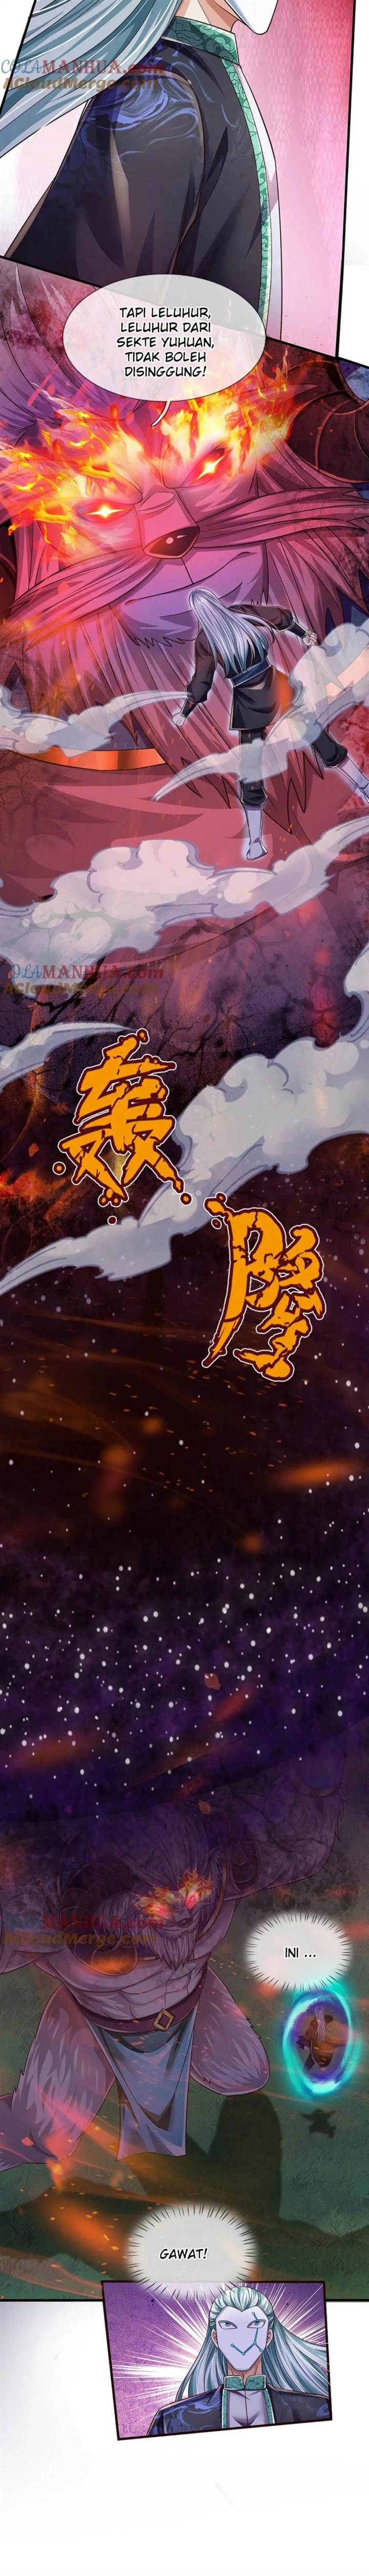 Star Sign In To Supreme Dantian Chapter 268